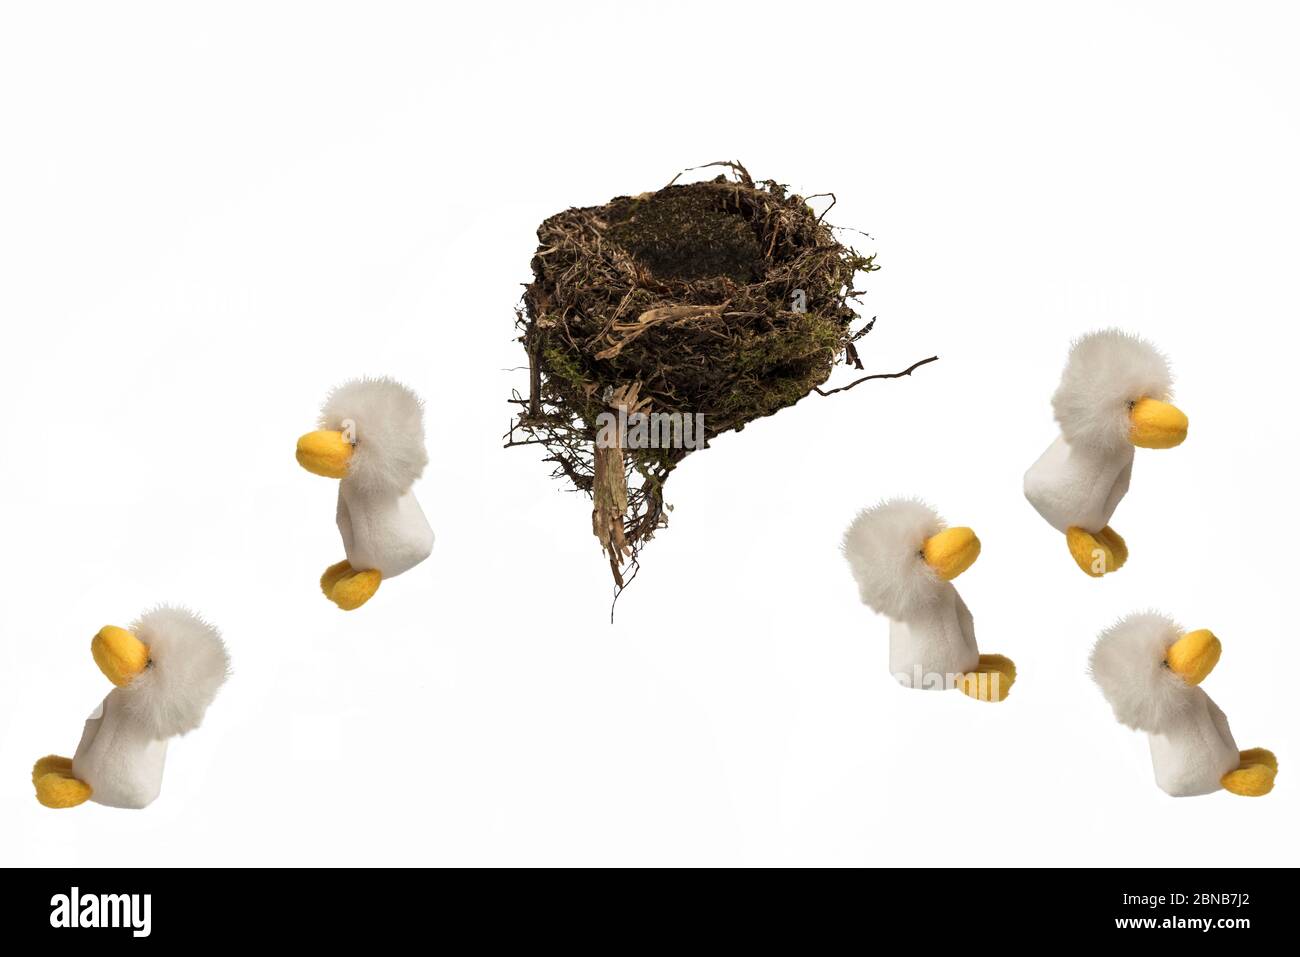 Five fluffytoy chicks jumping from real birds nest with Hooray above, against white background. Concept; Fleeing the nest, leaving home, empty nesters. Stock Photo